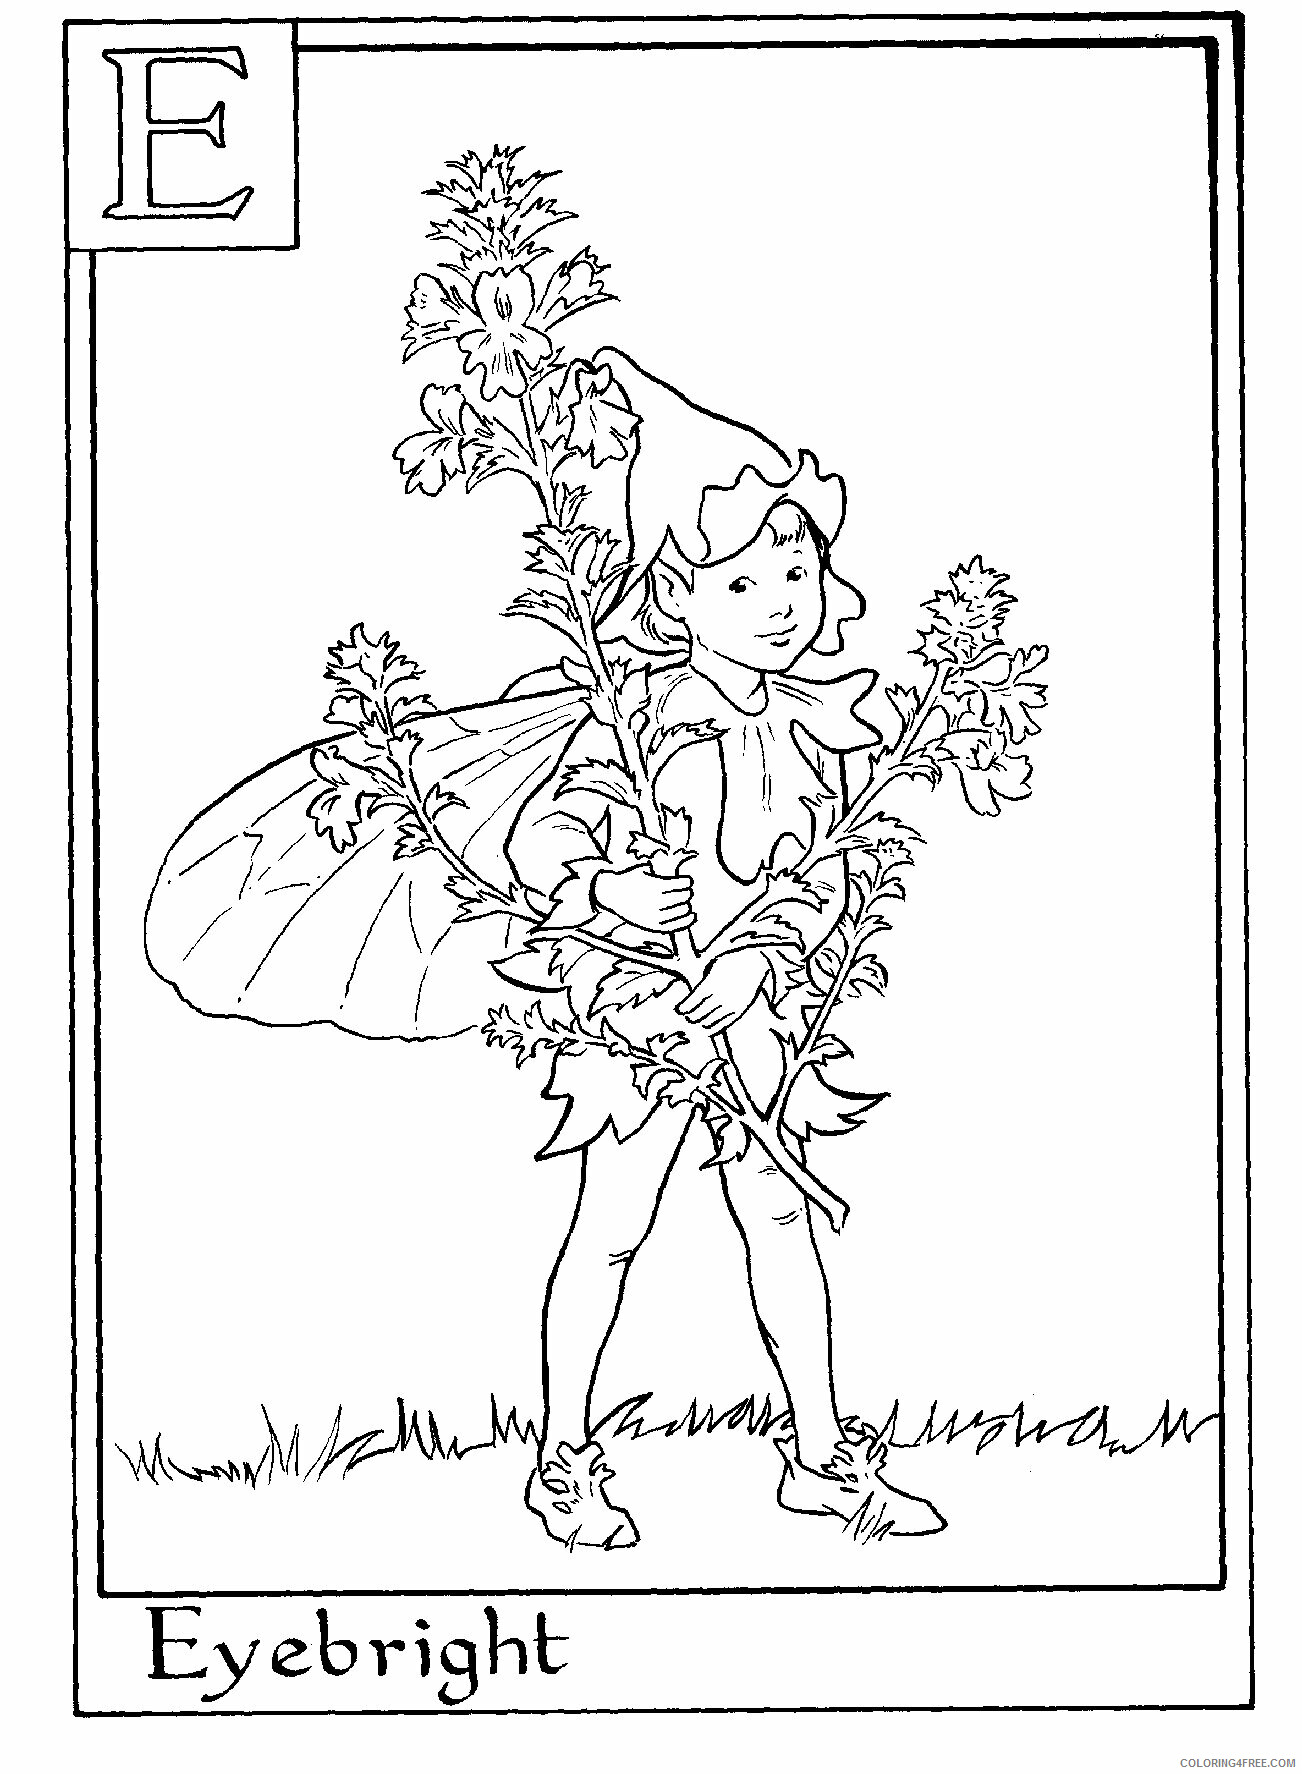 Alphabet Flowers Coloring Pages Printable Sheets Alphabet flower download 2021 a 4895 Coloring4free